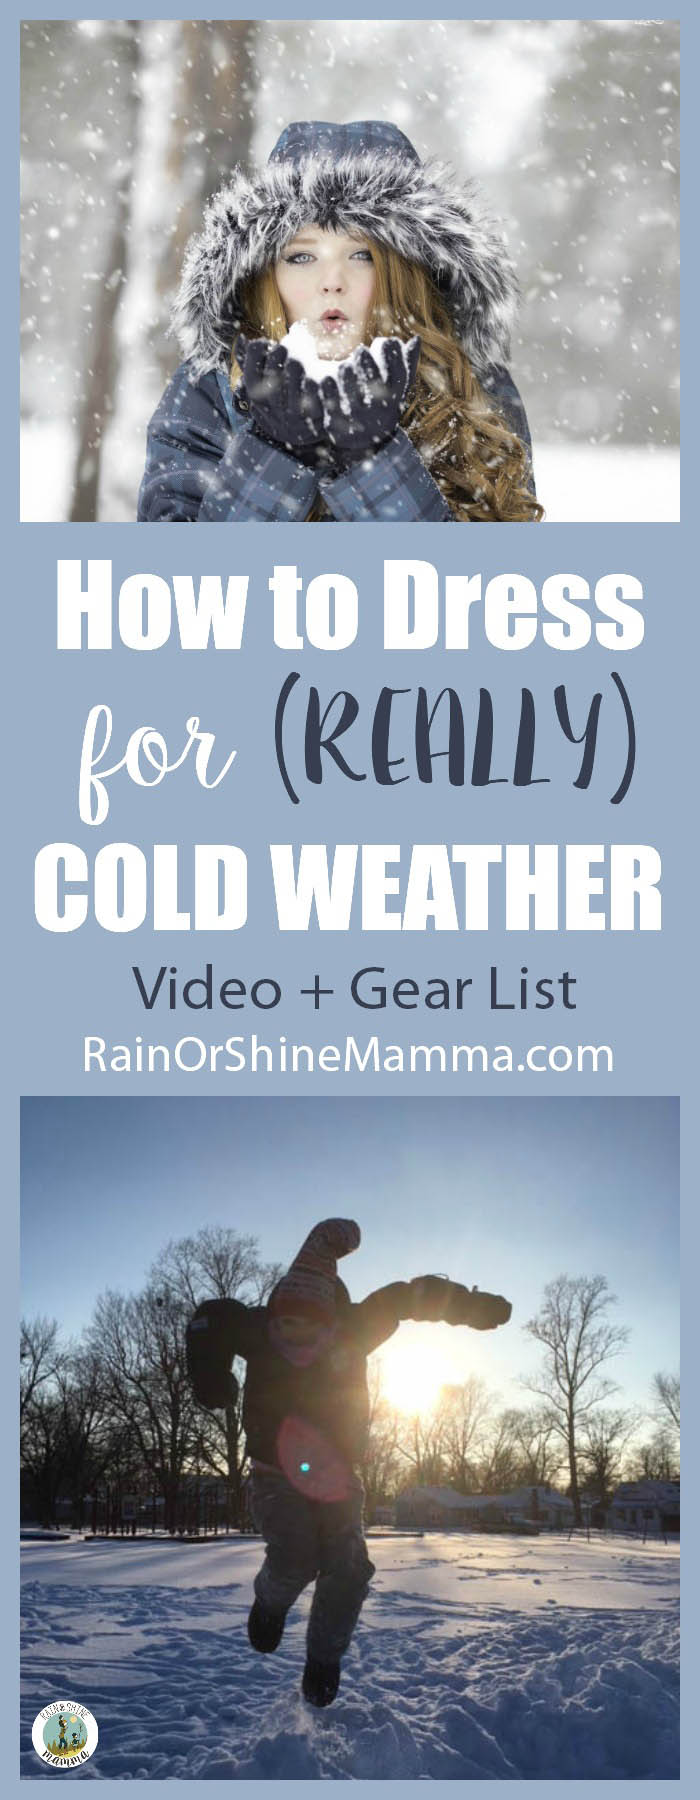 How to Dress for Cold Weather (Video and Complete Gear List). Tips for dressing kids for winter from Rain or Shine Mamma. #winter #gear #cold #outdoor